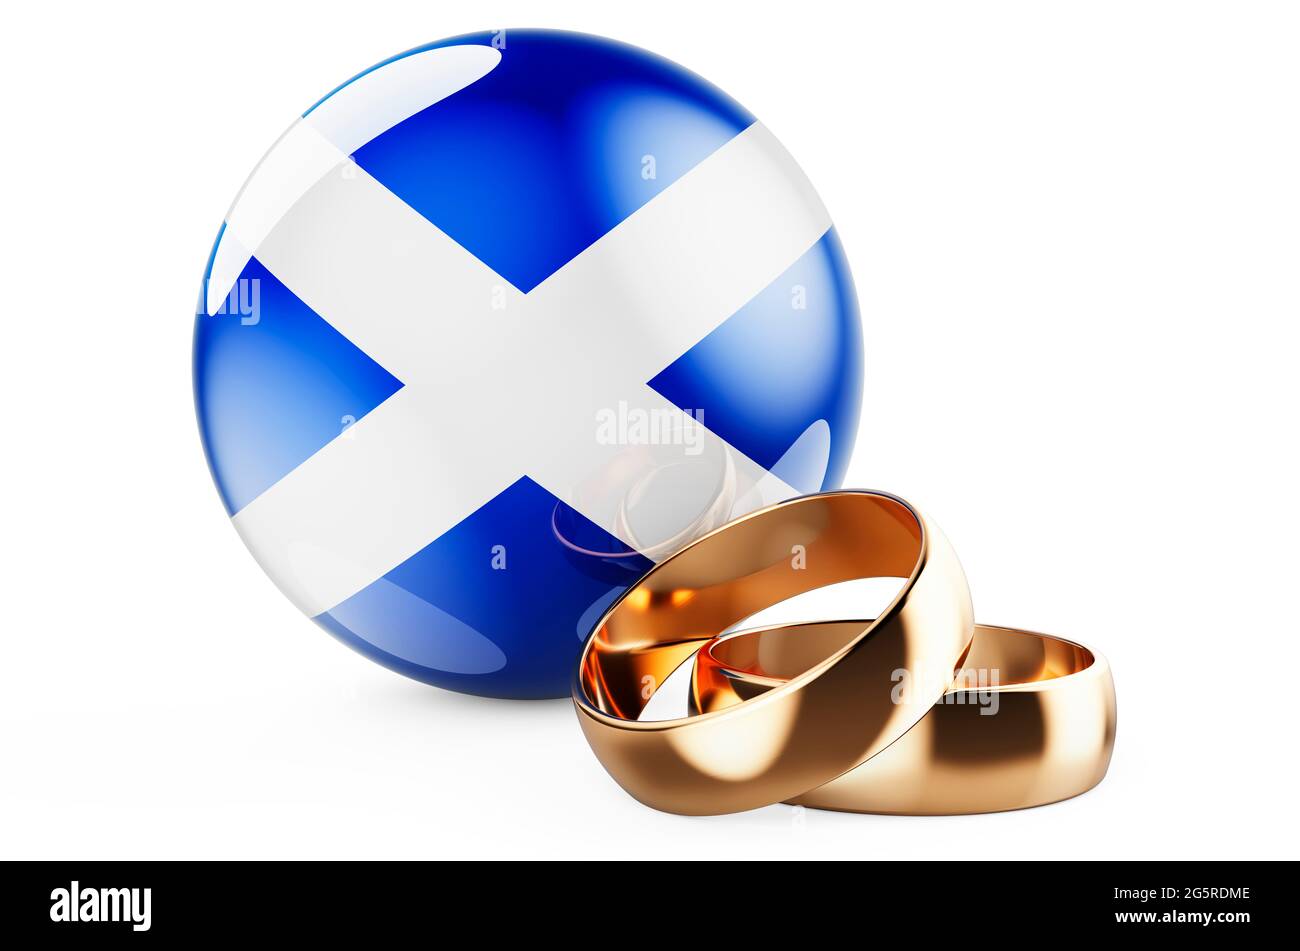 Page 2 - Marriage In Scotland High Resolution Stock Photography and Images  - Alamy